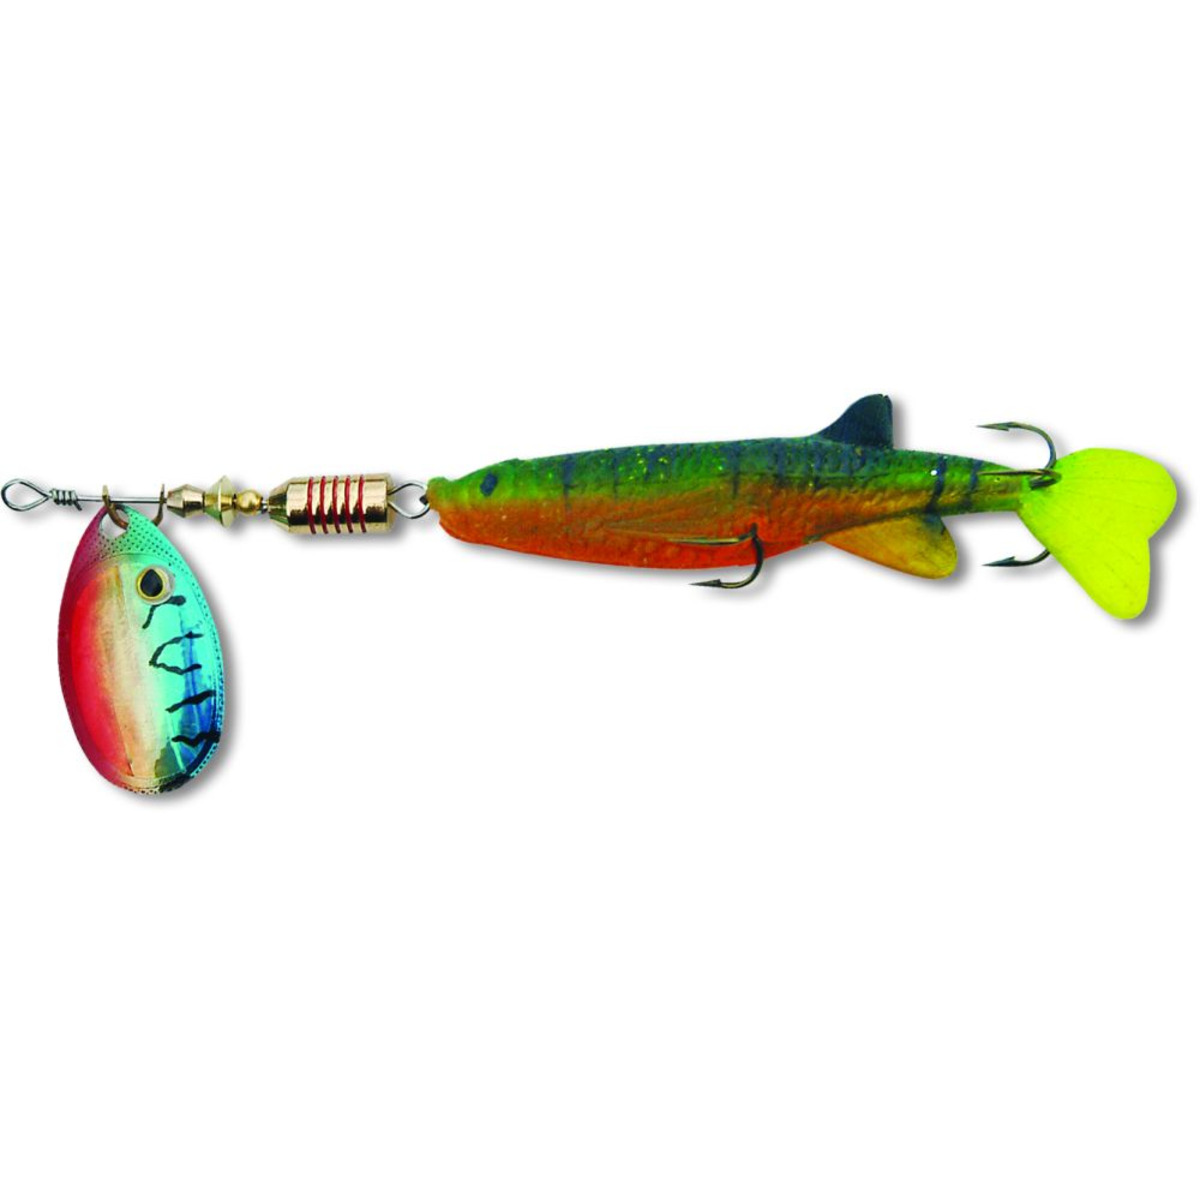 Zebco Minnow Flyer - 3 g - green/red